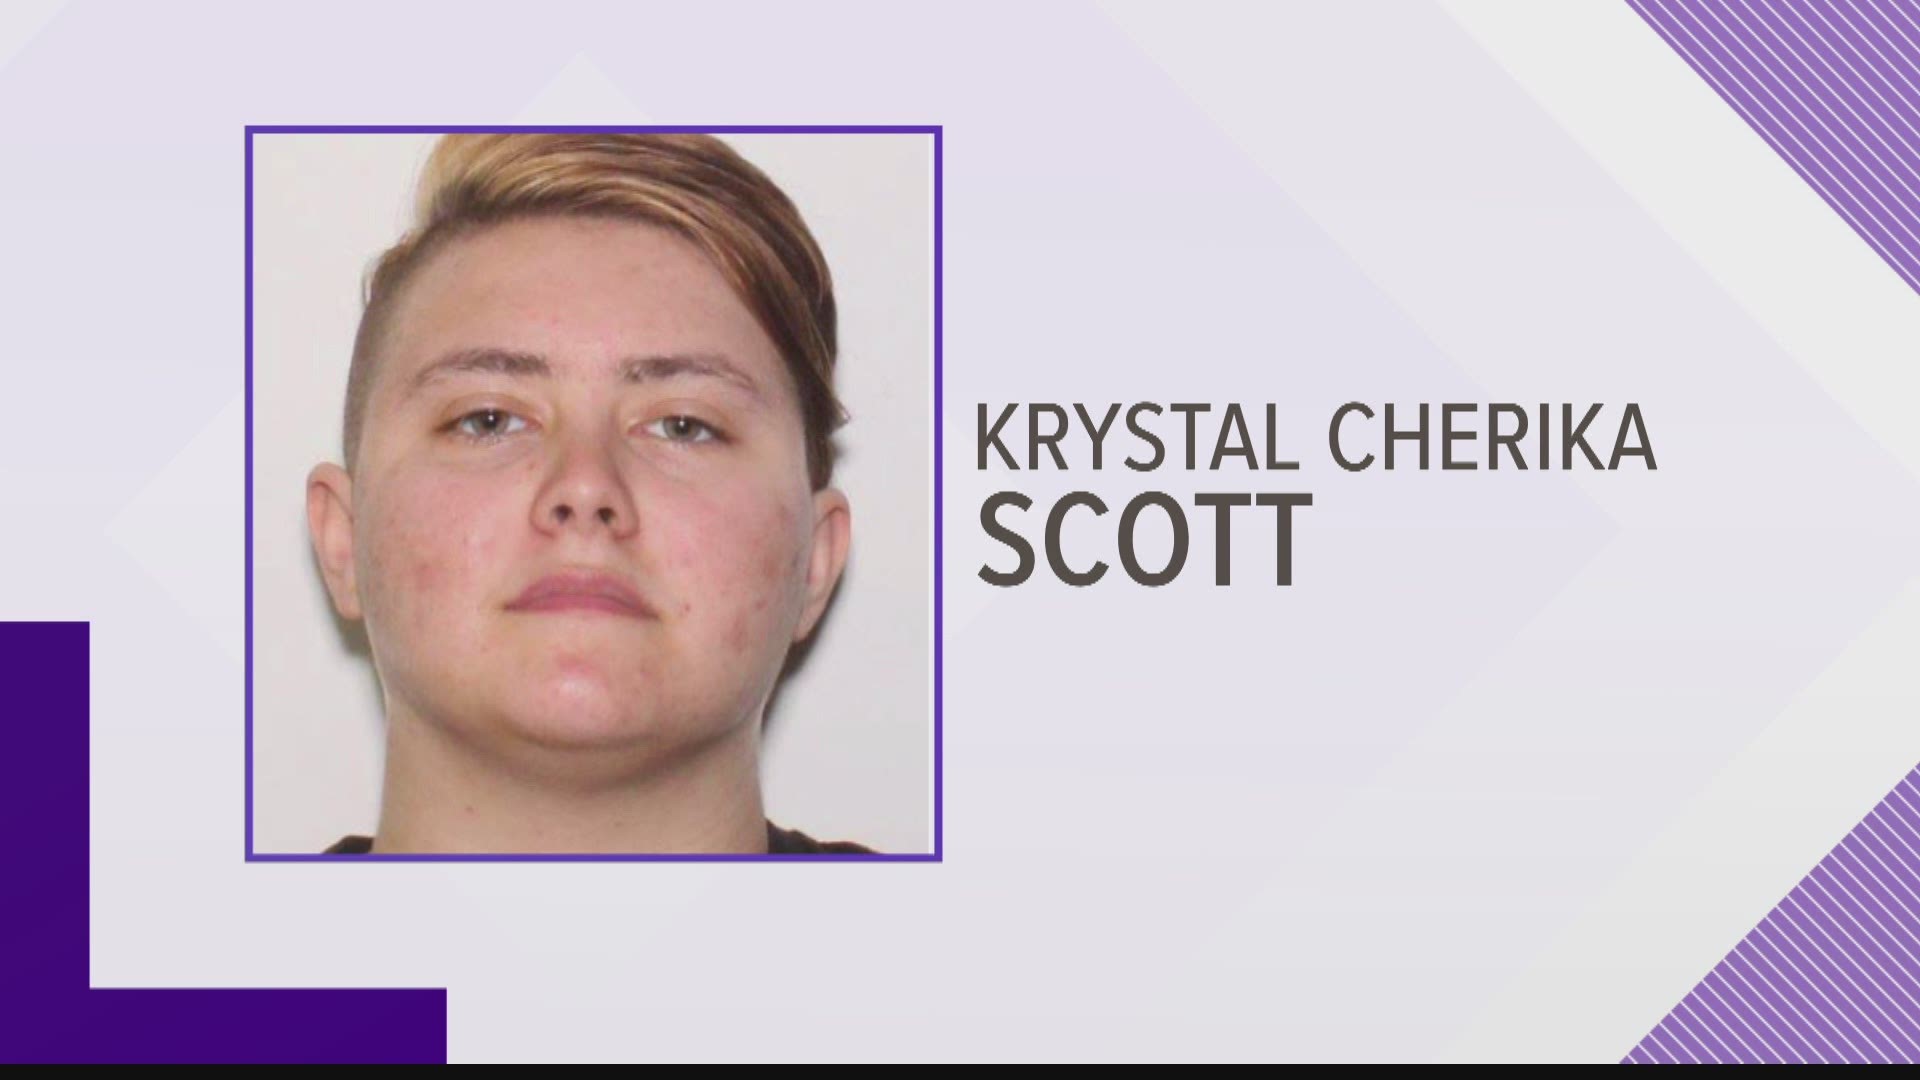 Krystal Cherika Scott was arrested Tuesday on federal animal cruelty charges.